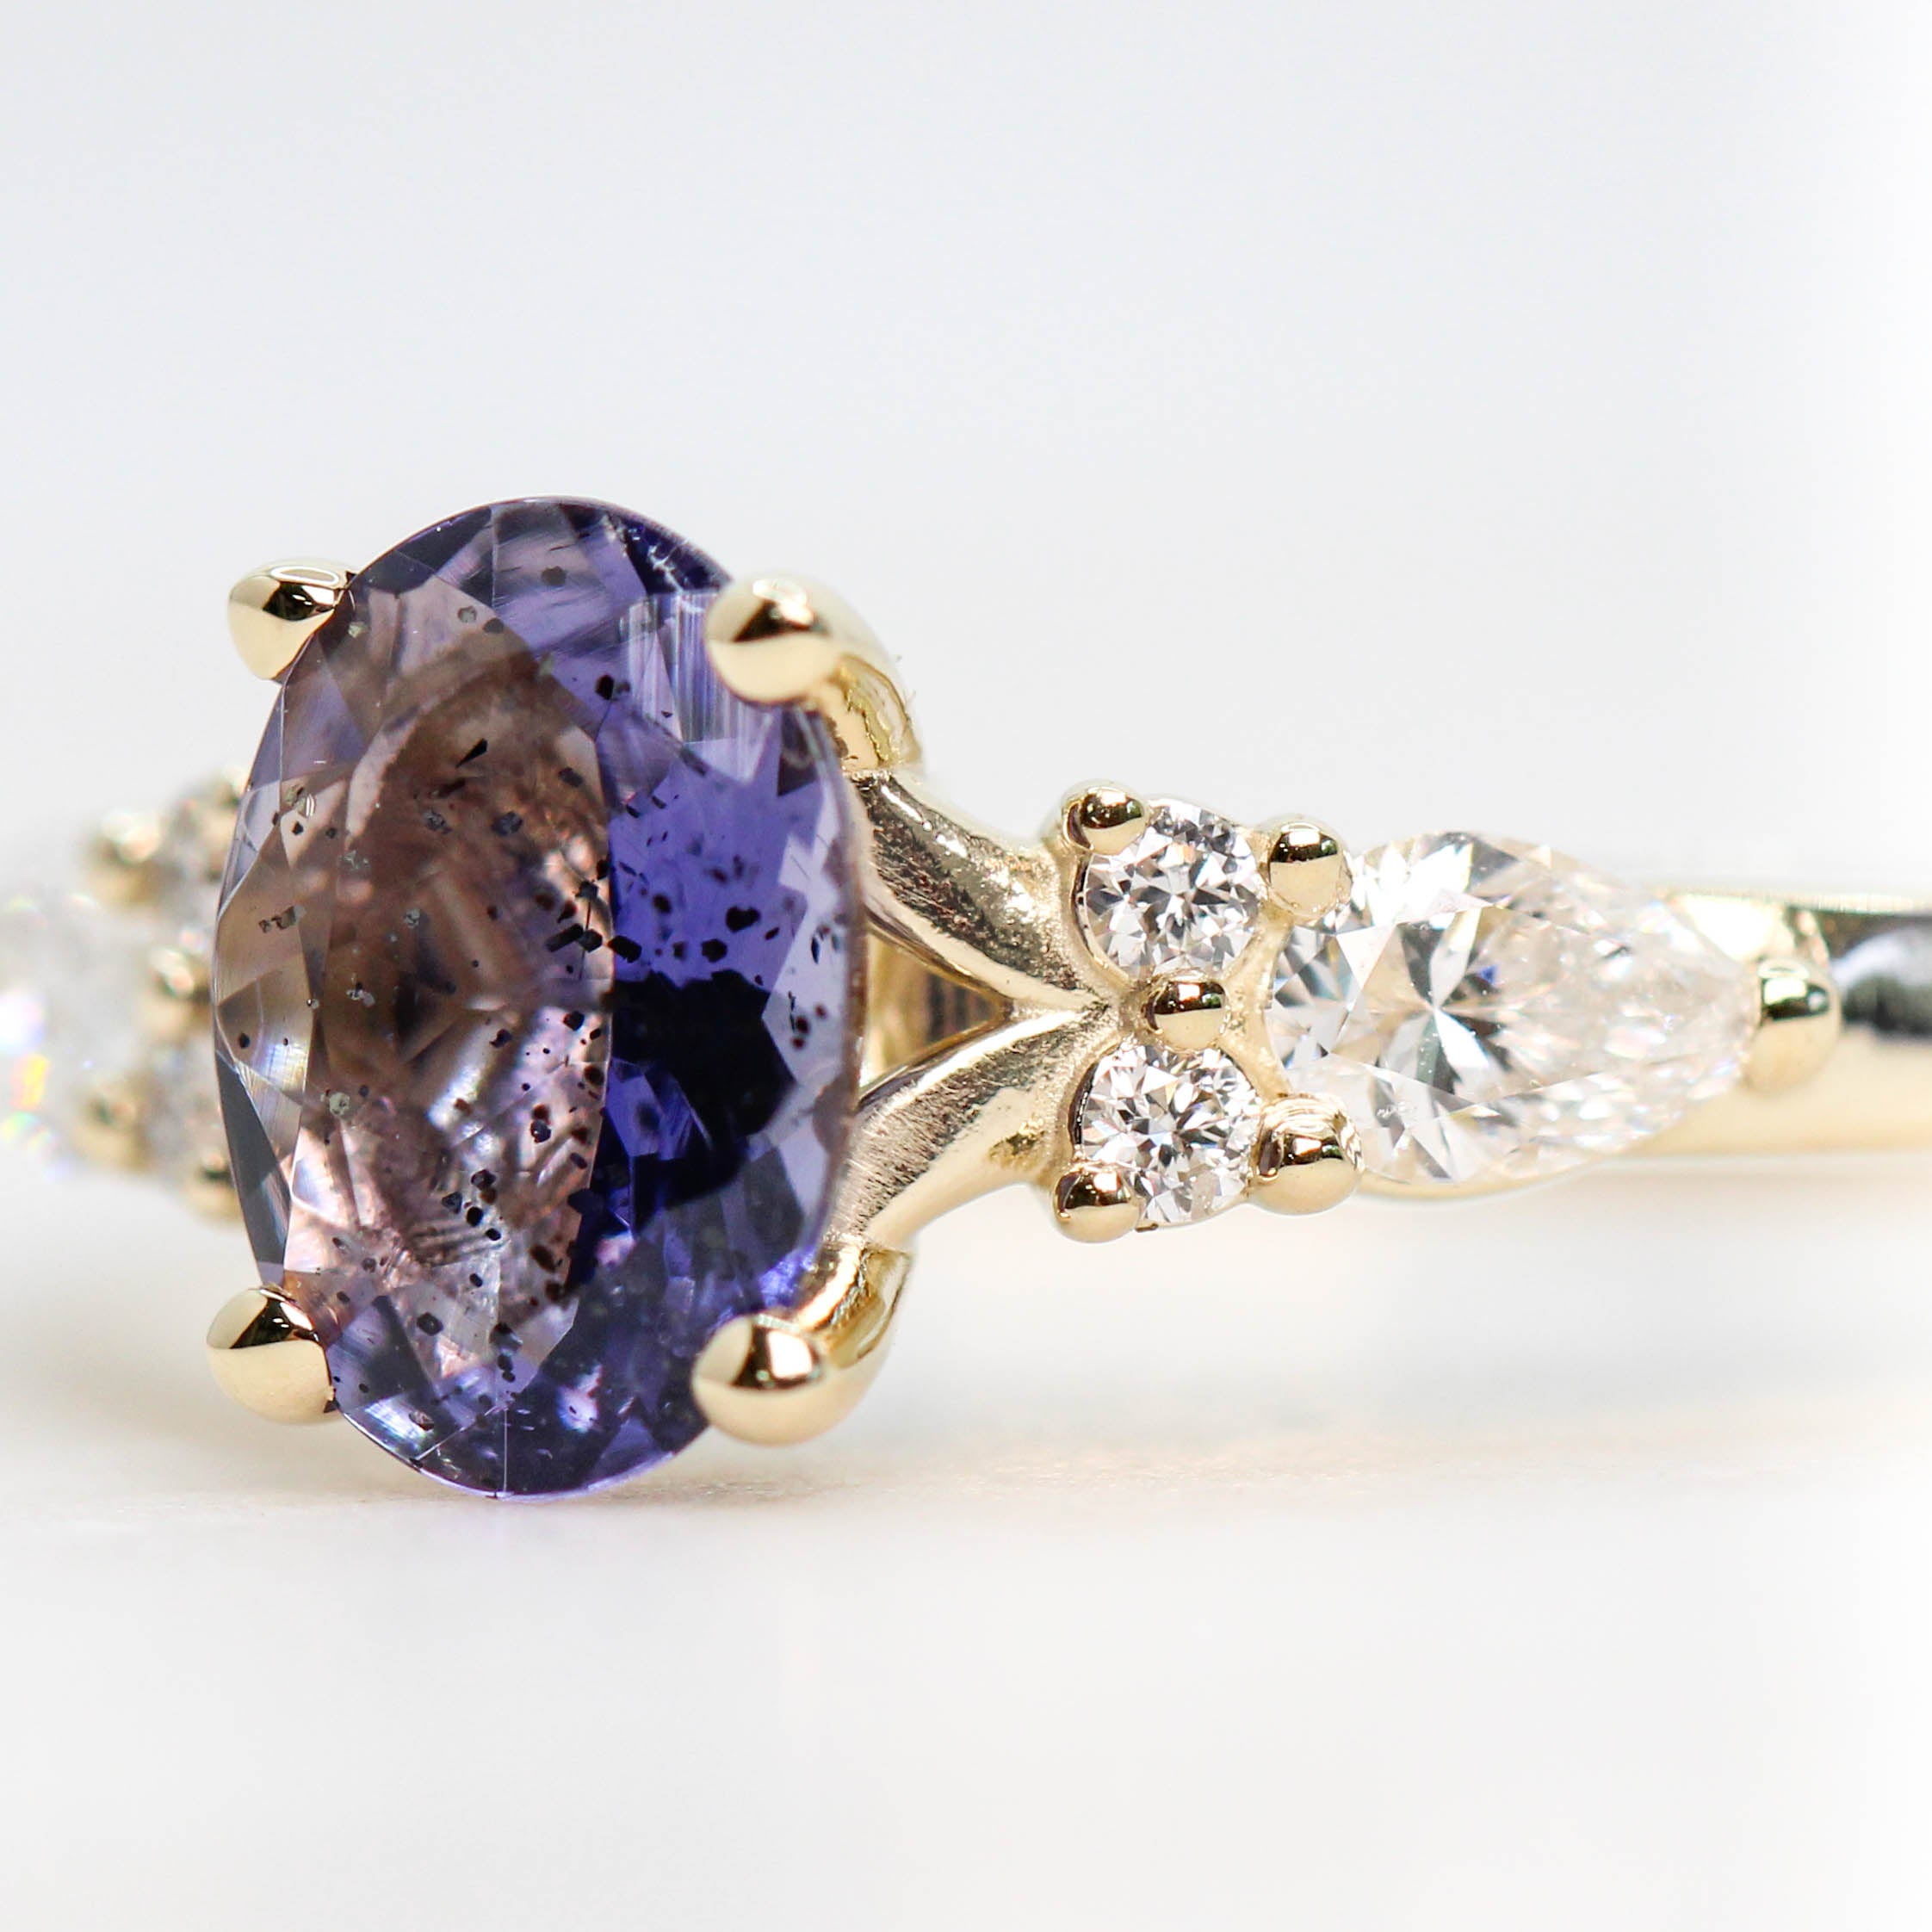 Jenna Ring with a 0.64 Carat Indigo Oval Iolite and White Accent Diamonds in 14k Yellow Gold - Ready to Size and Ship - Midwinter Co. Alternative Bridal Rings and Modern Fine Jewelry